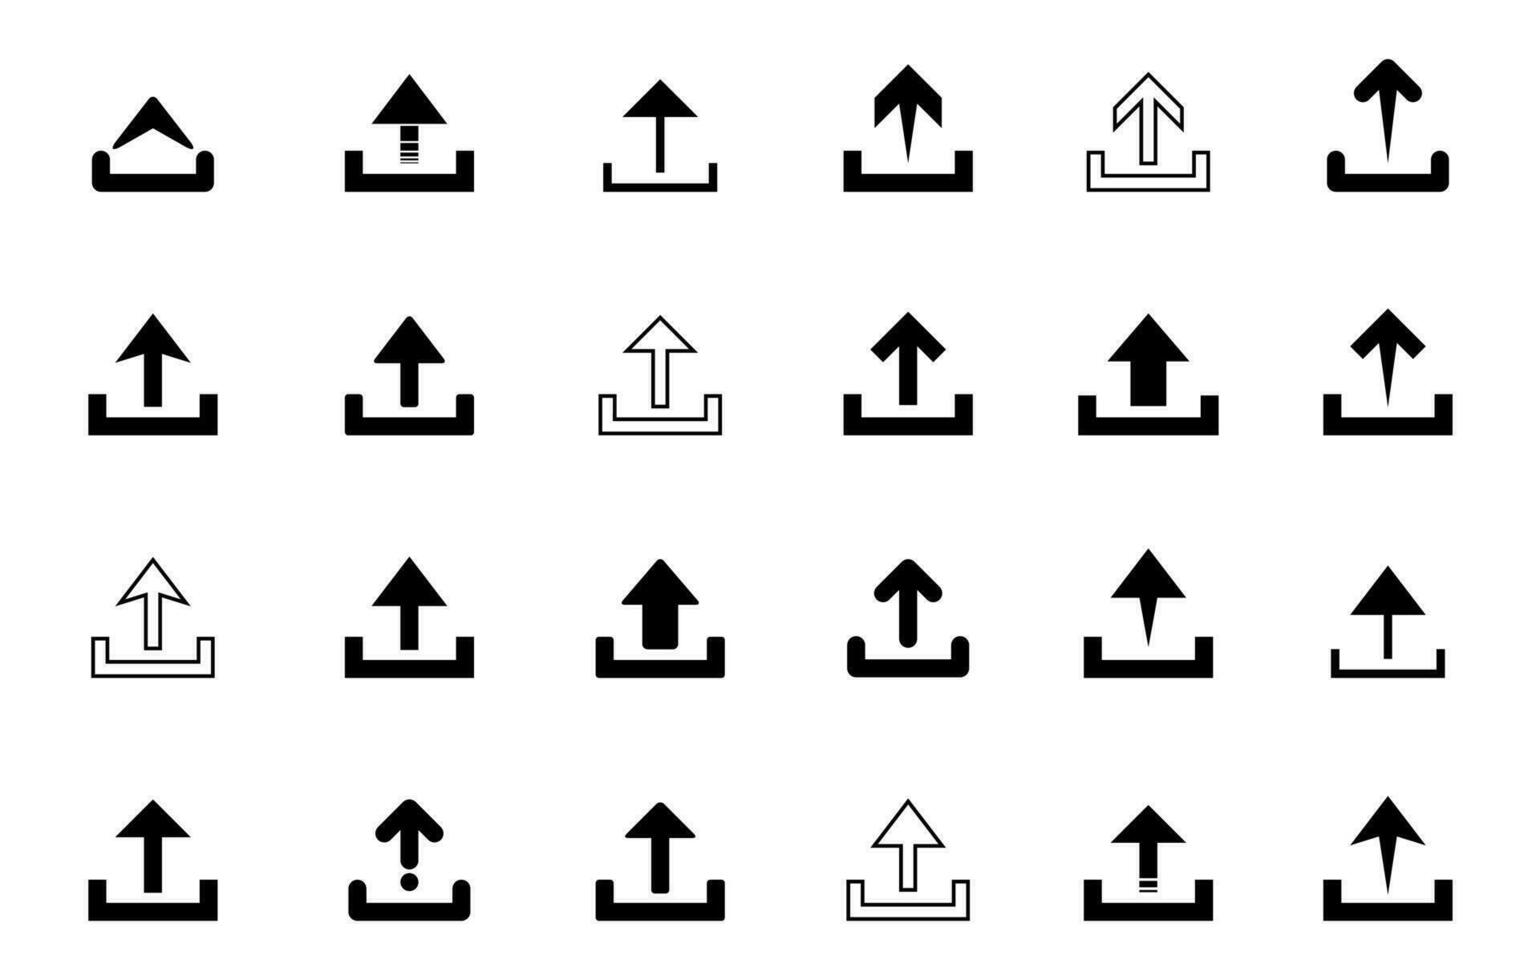 Upload icon vector set collection in flat style. Upward arrow sign symbol